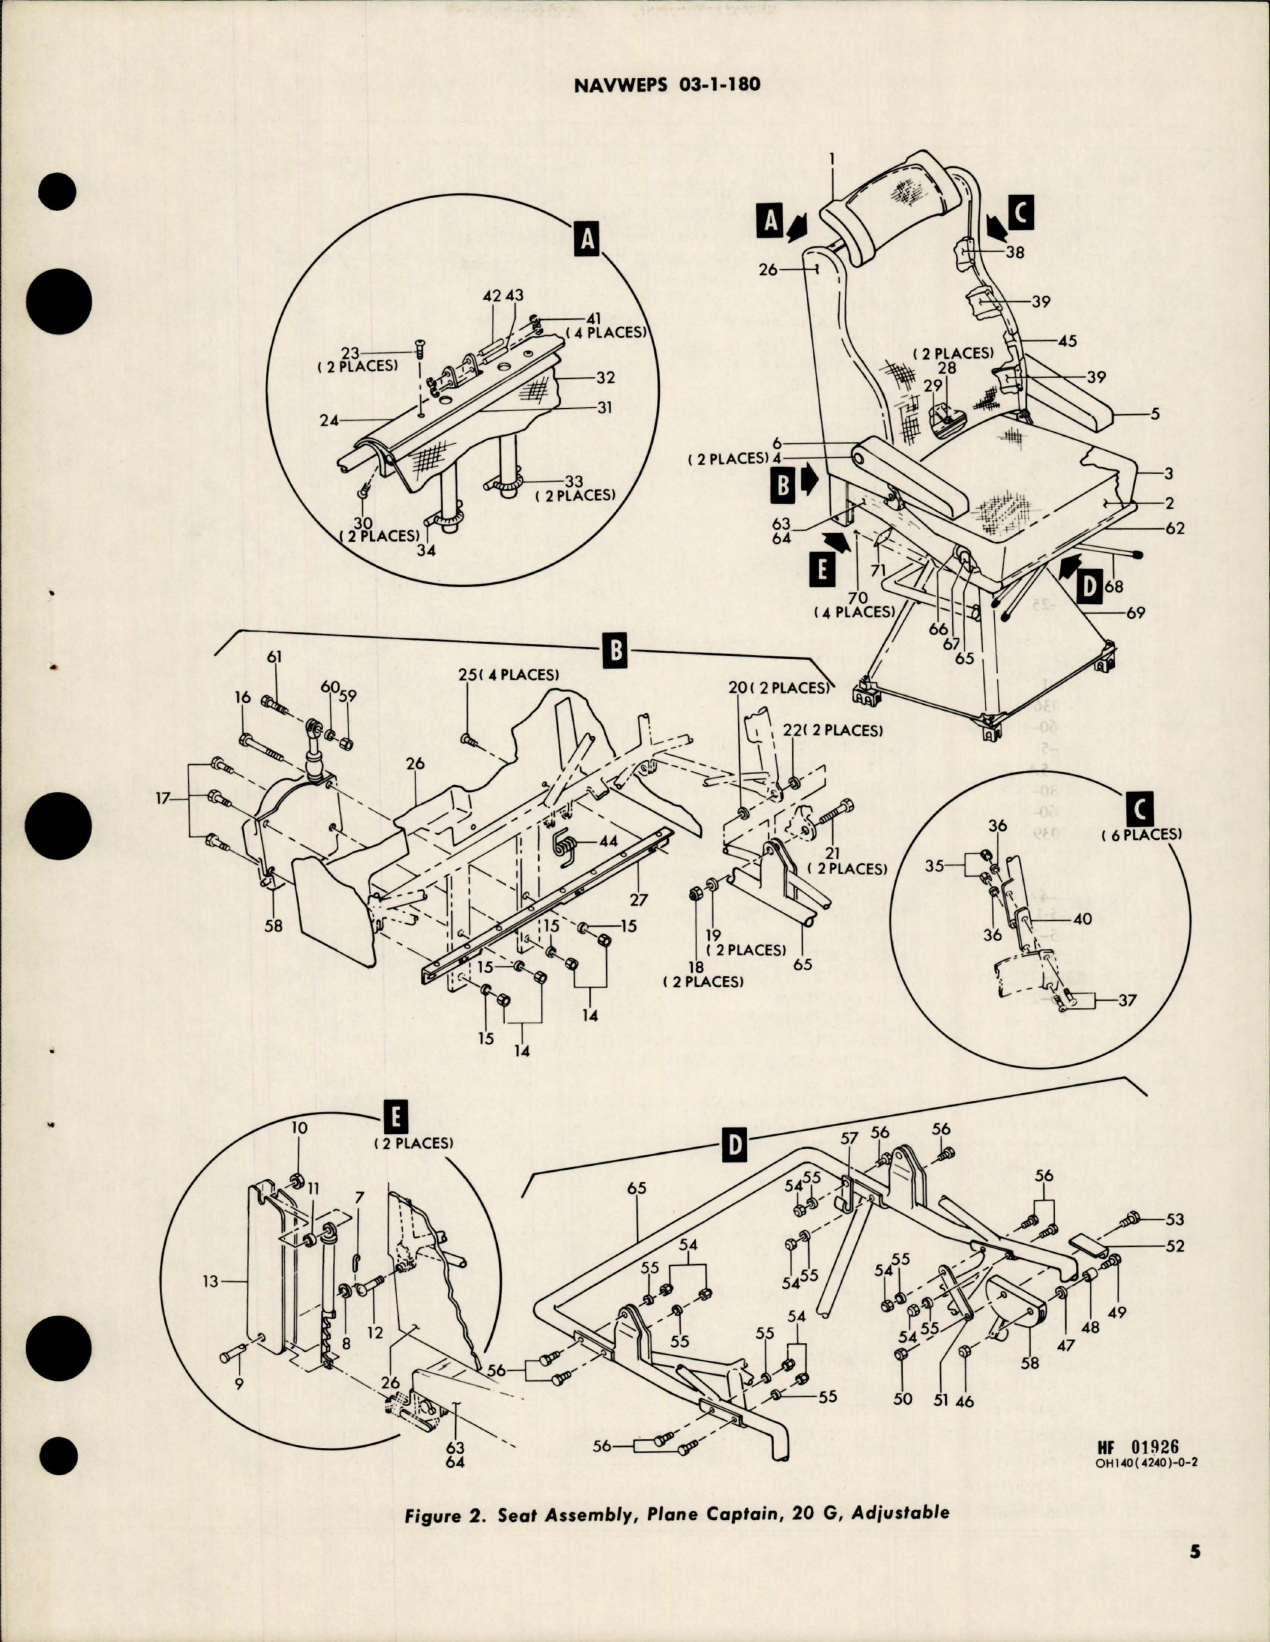 Sample page 7 from AirCorps Library document: Overhaul Instructions with Parts for Pilots, Copilots and Captains Seat Assemblies - Parts 4240-5 and 4245-5 